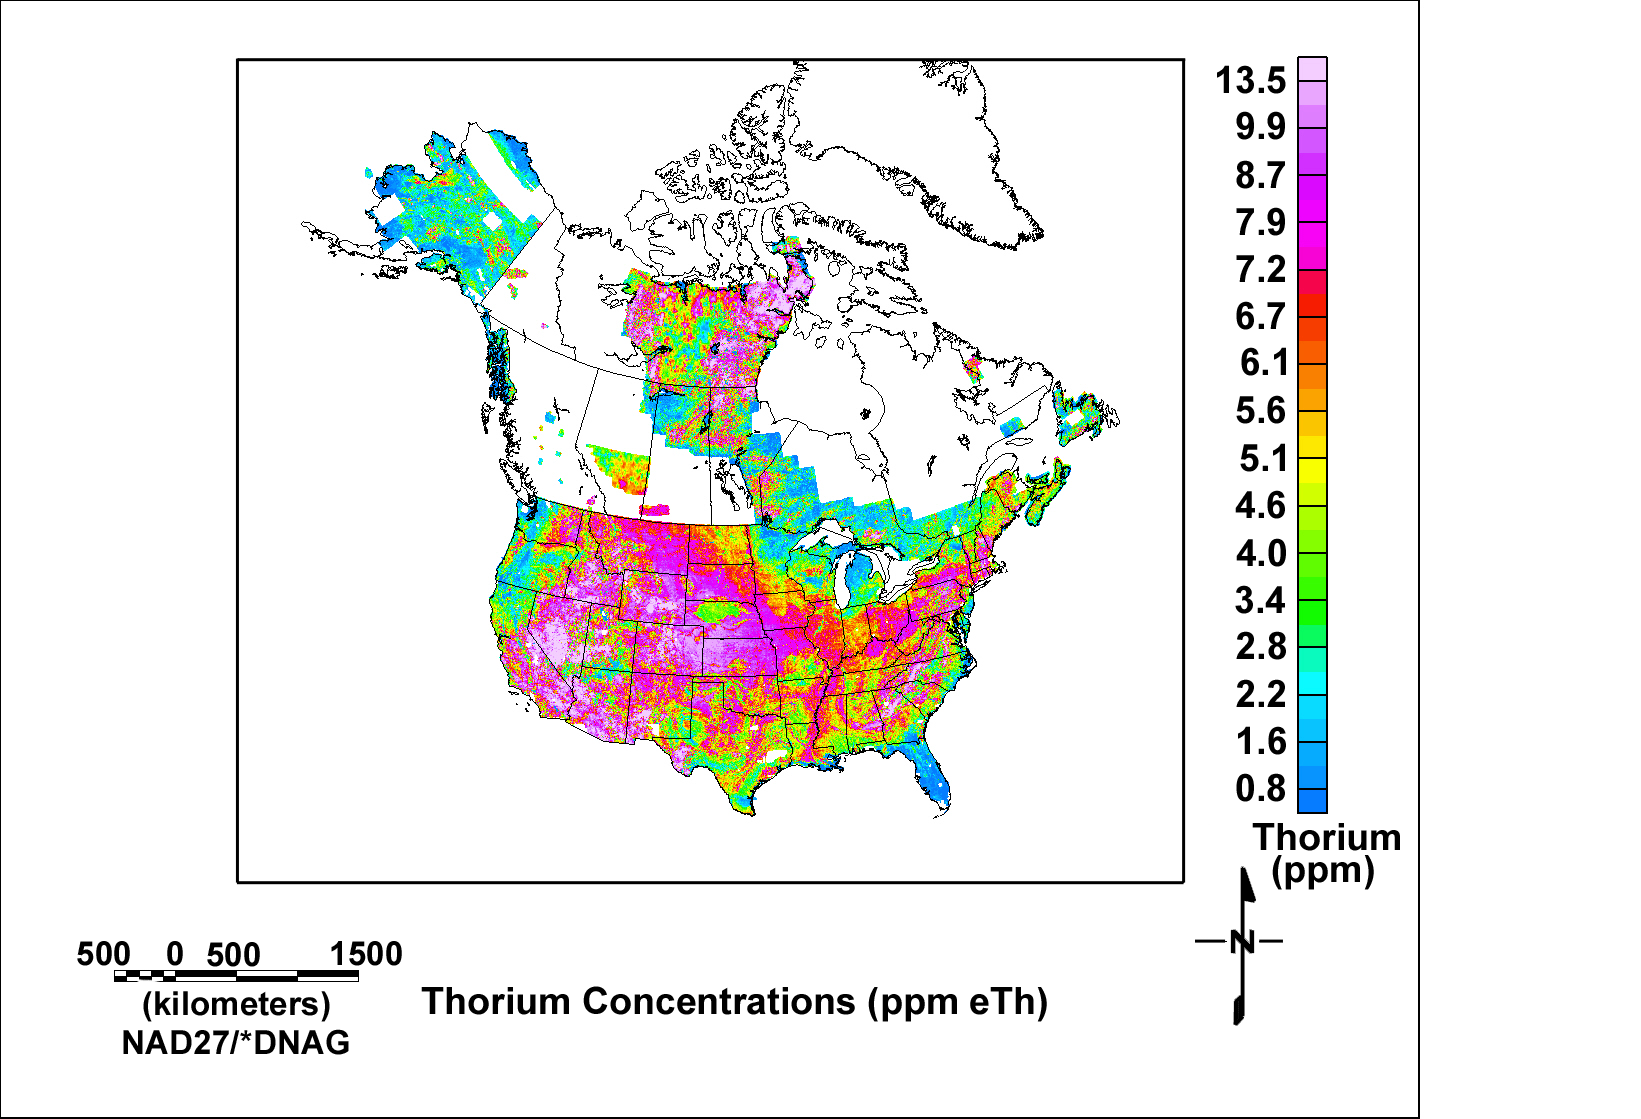 Image of map showing thorium concentrations.